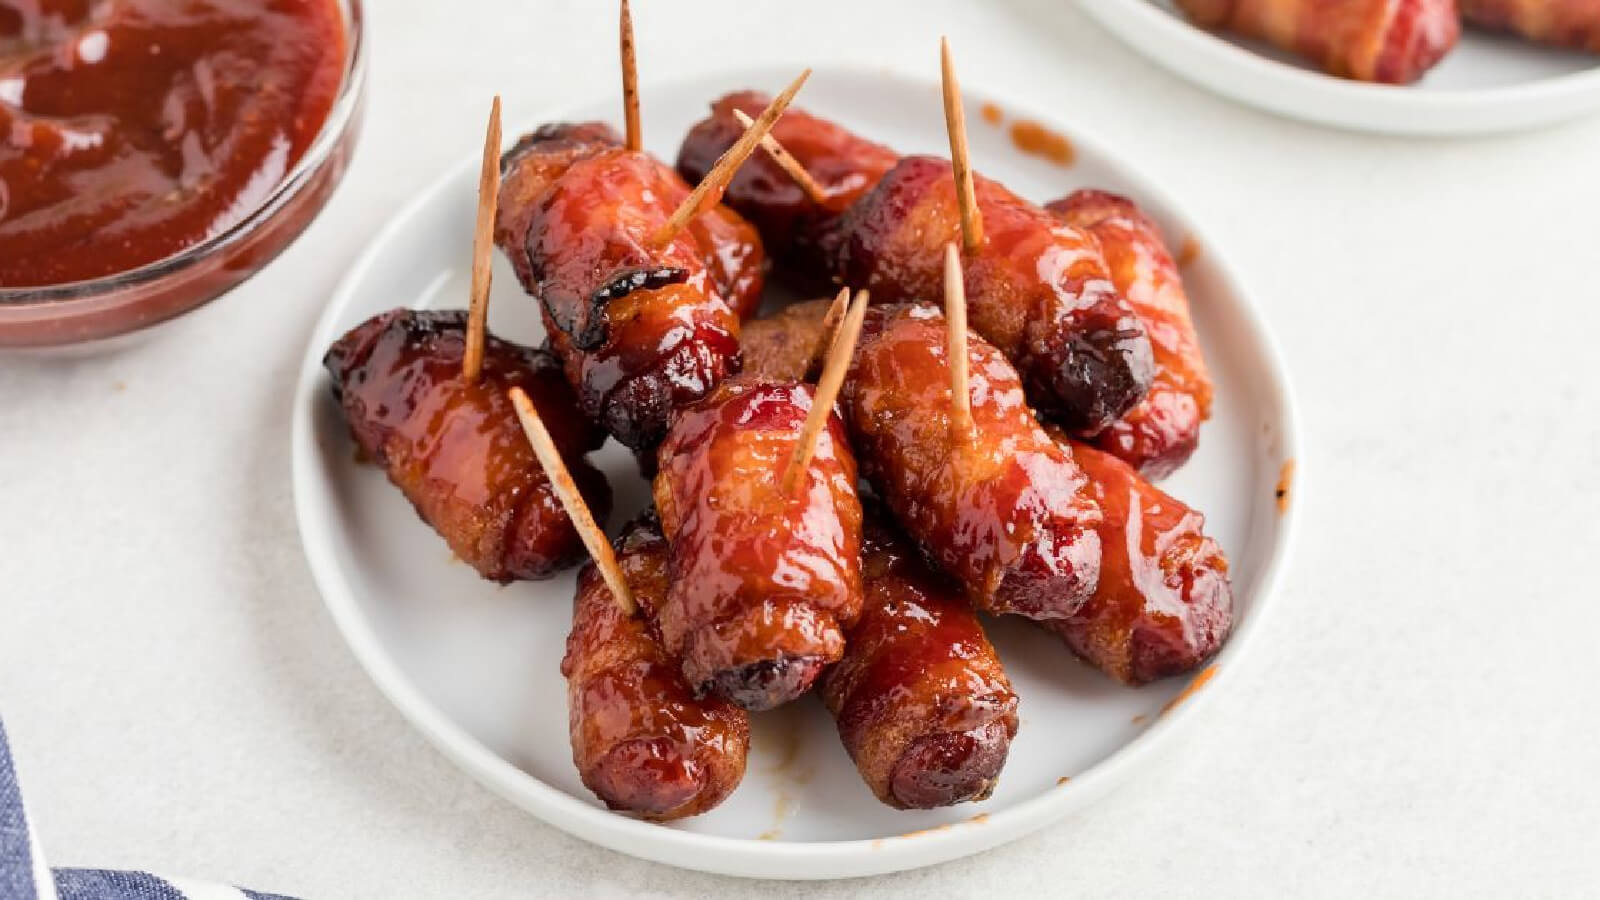 bacon wrapped smokies on a white plate, ready to serve.